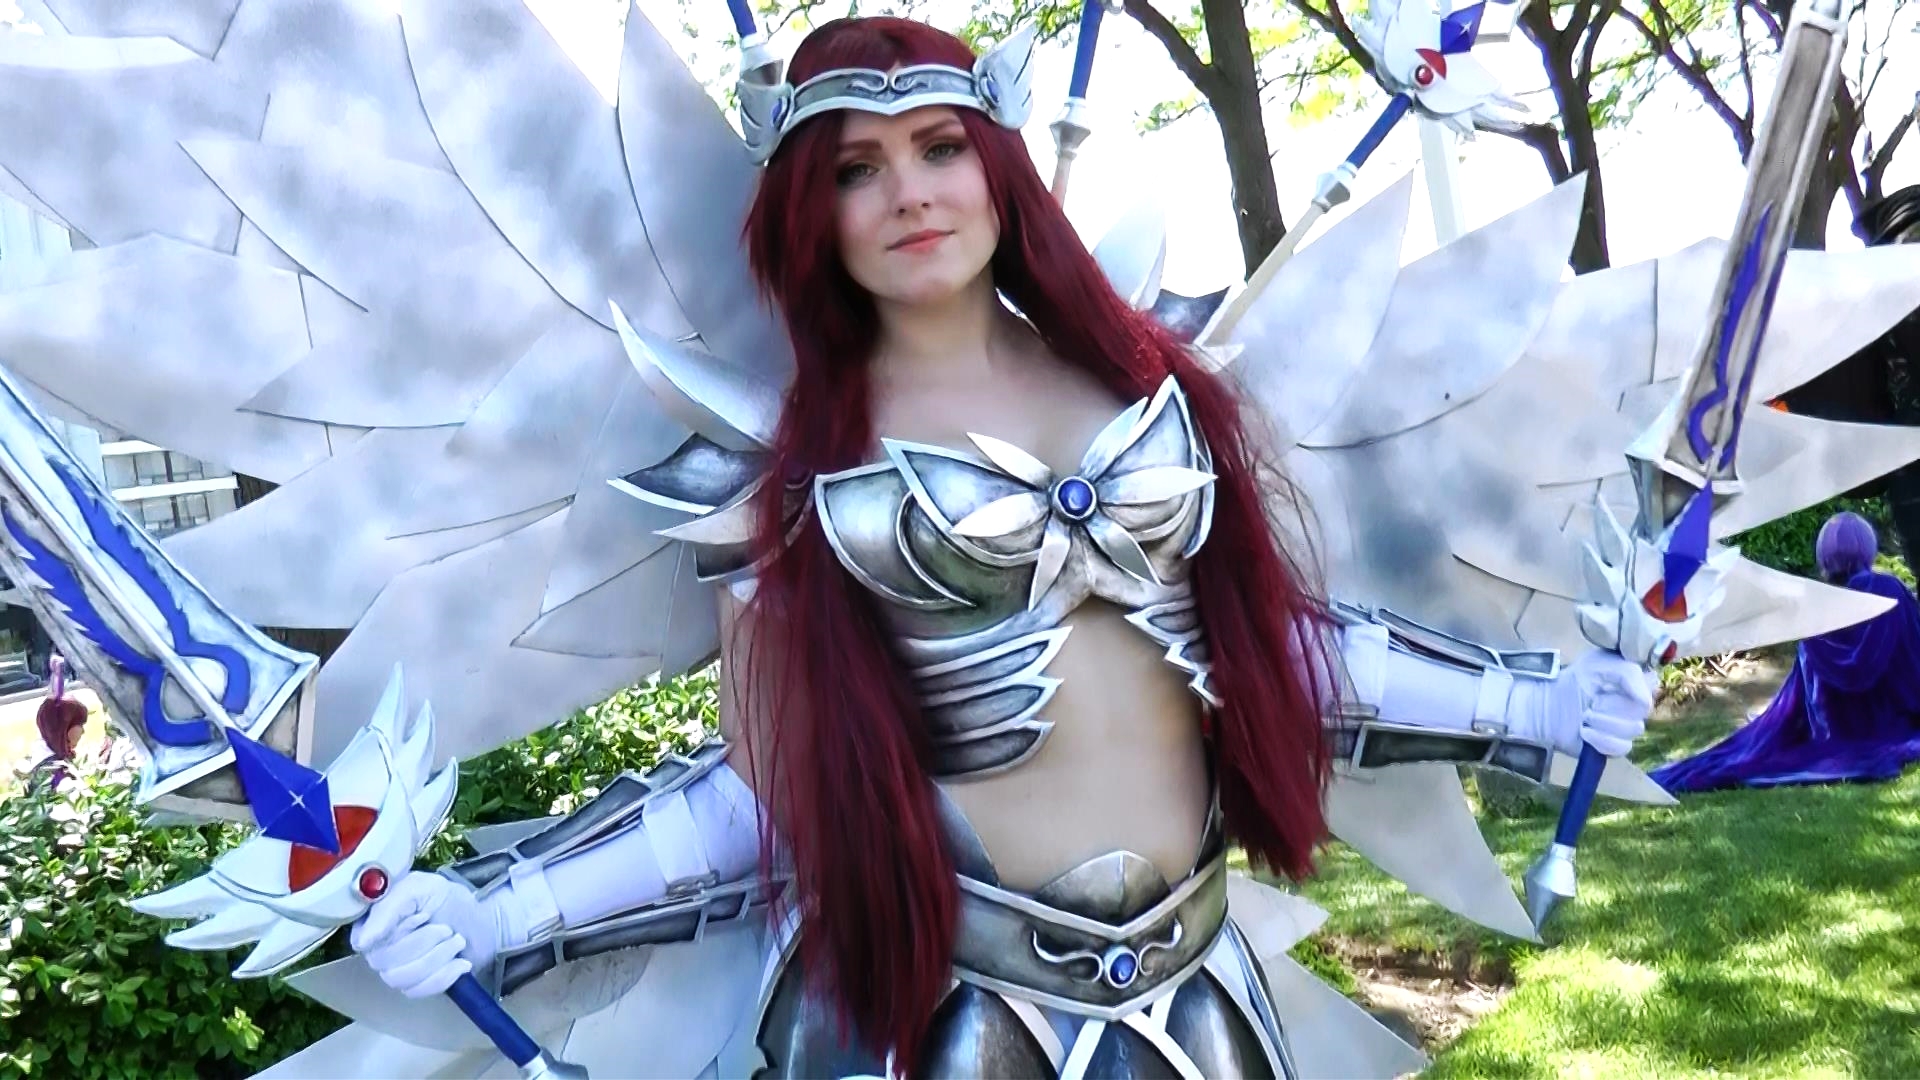  Erza Scarlet from Fairytale looking both fierce and angelic with her wings and swords. 